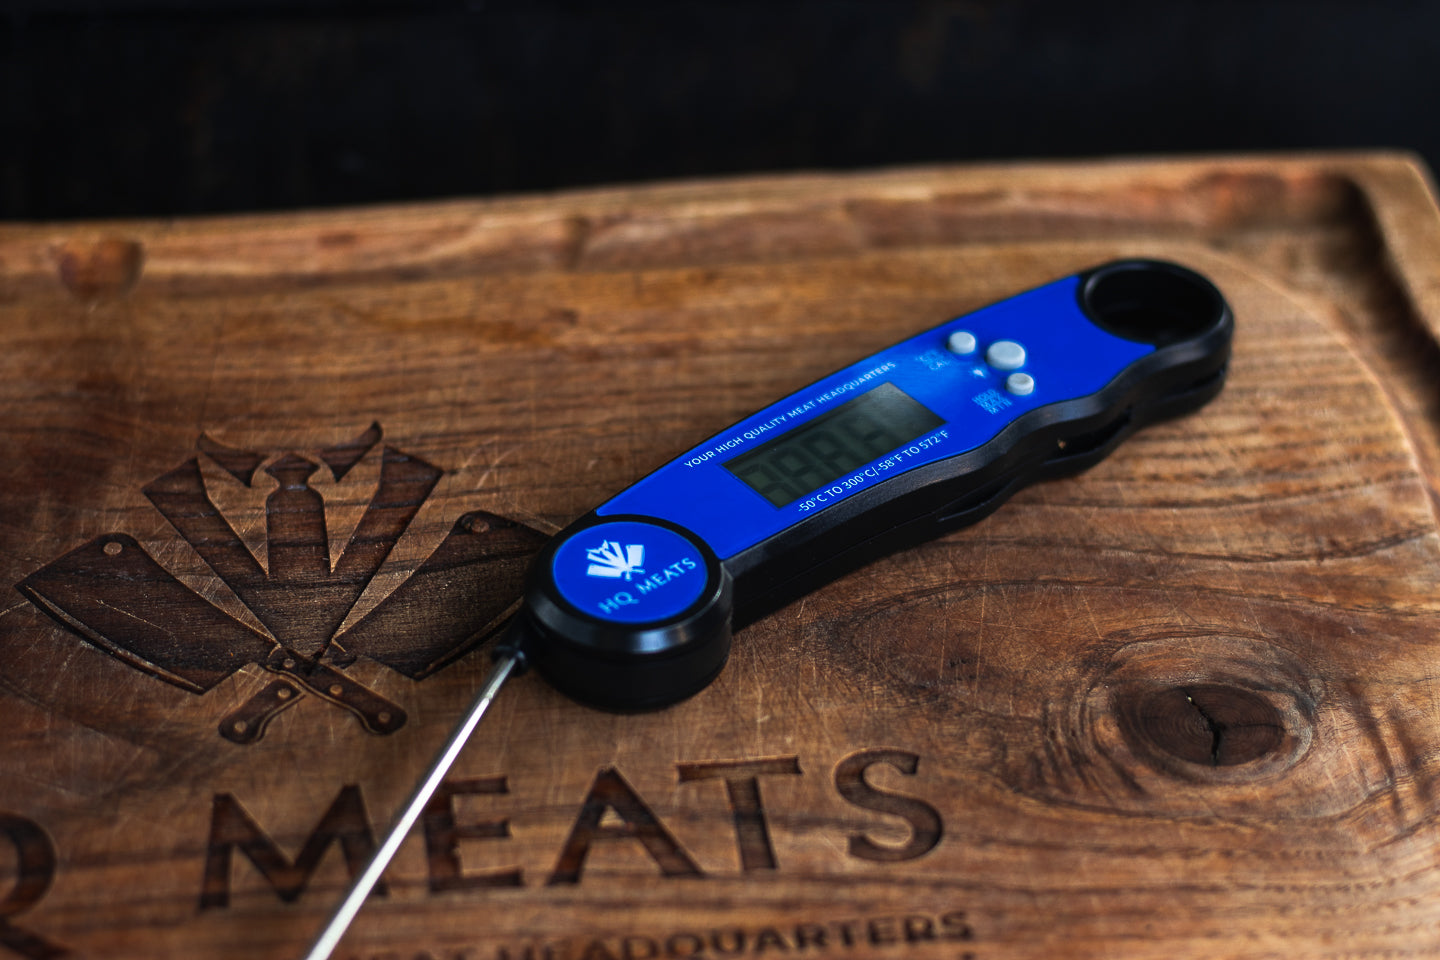 HQ MEATS Thermometer